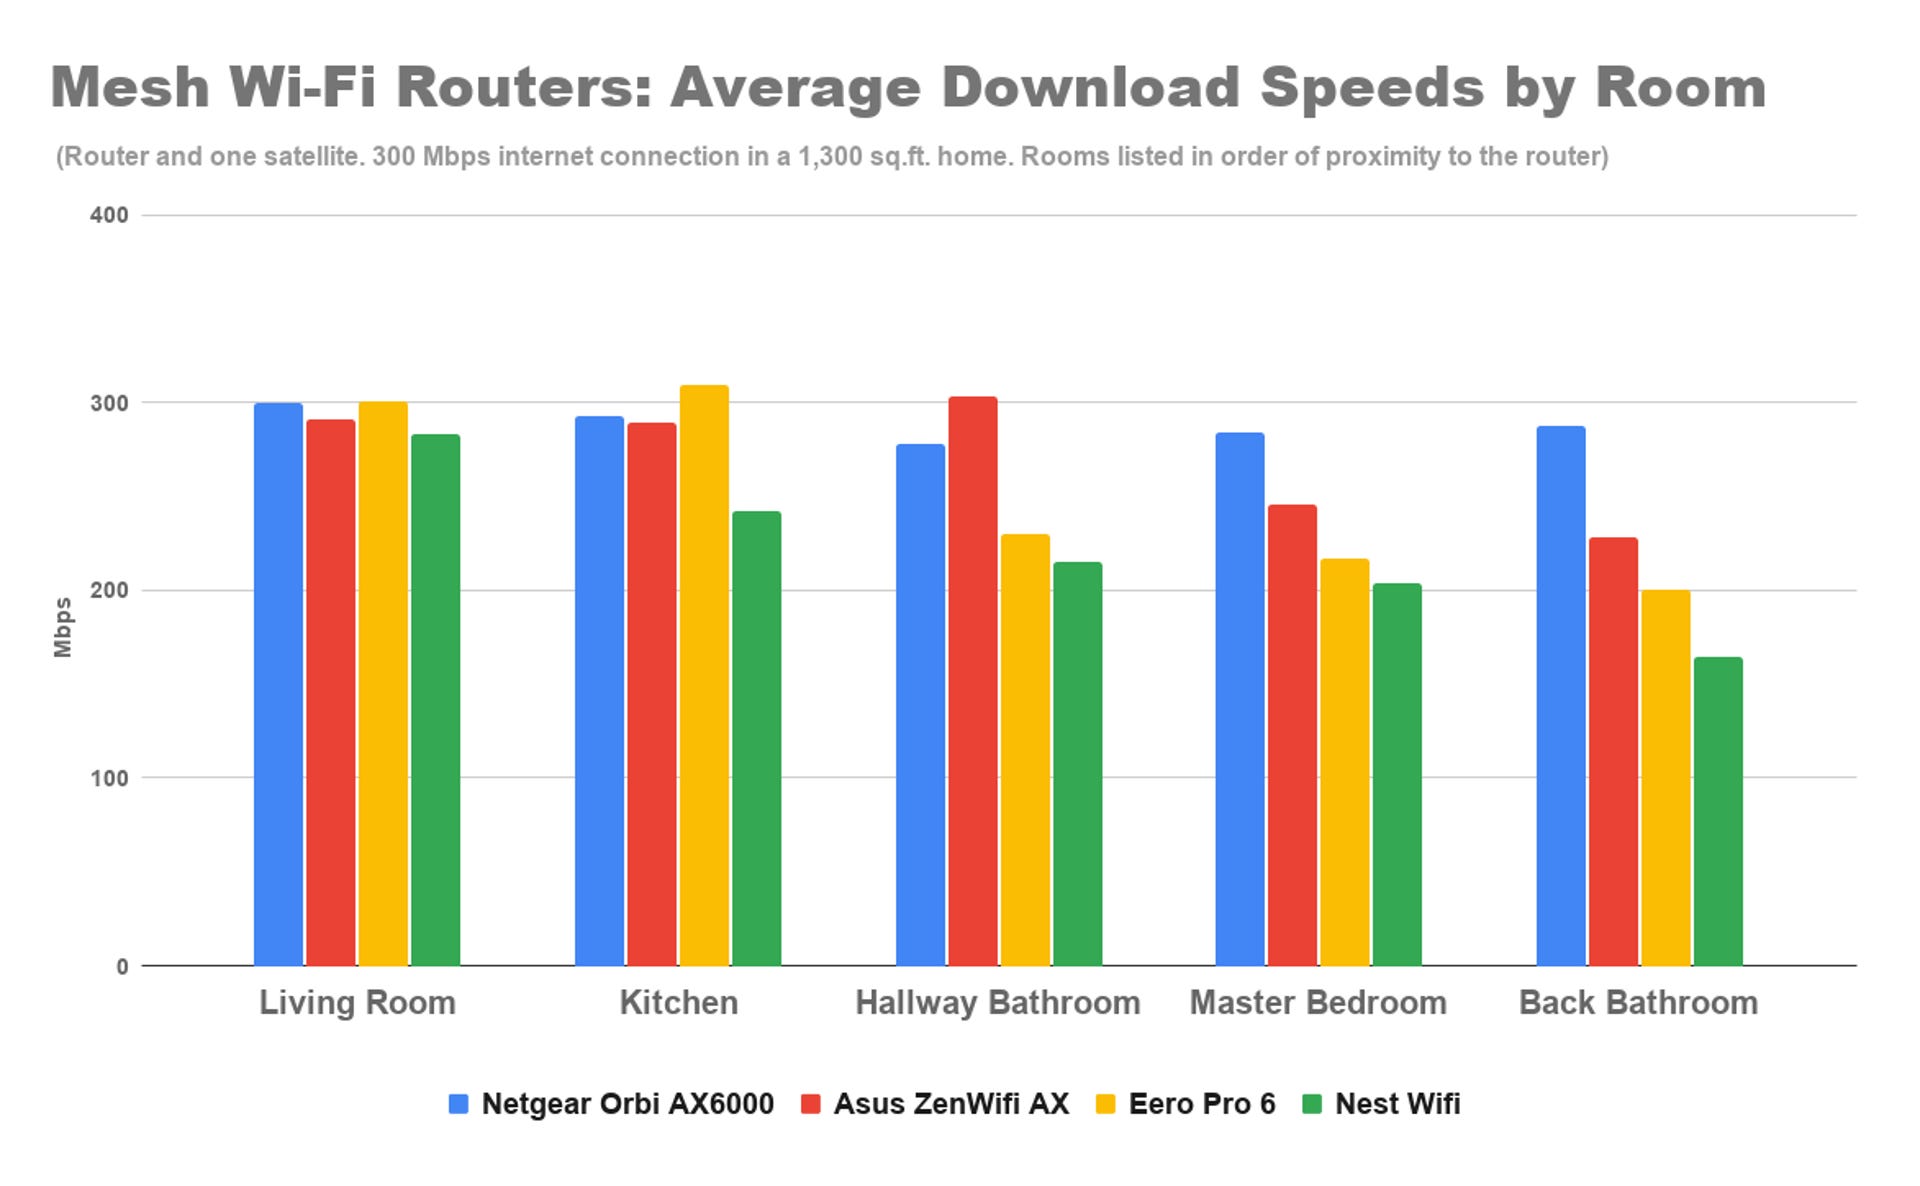 mesh-wi-fi-routers-average-download-speeds-by-room.png